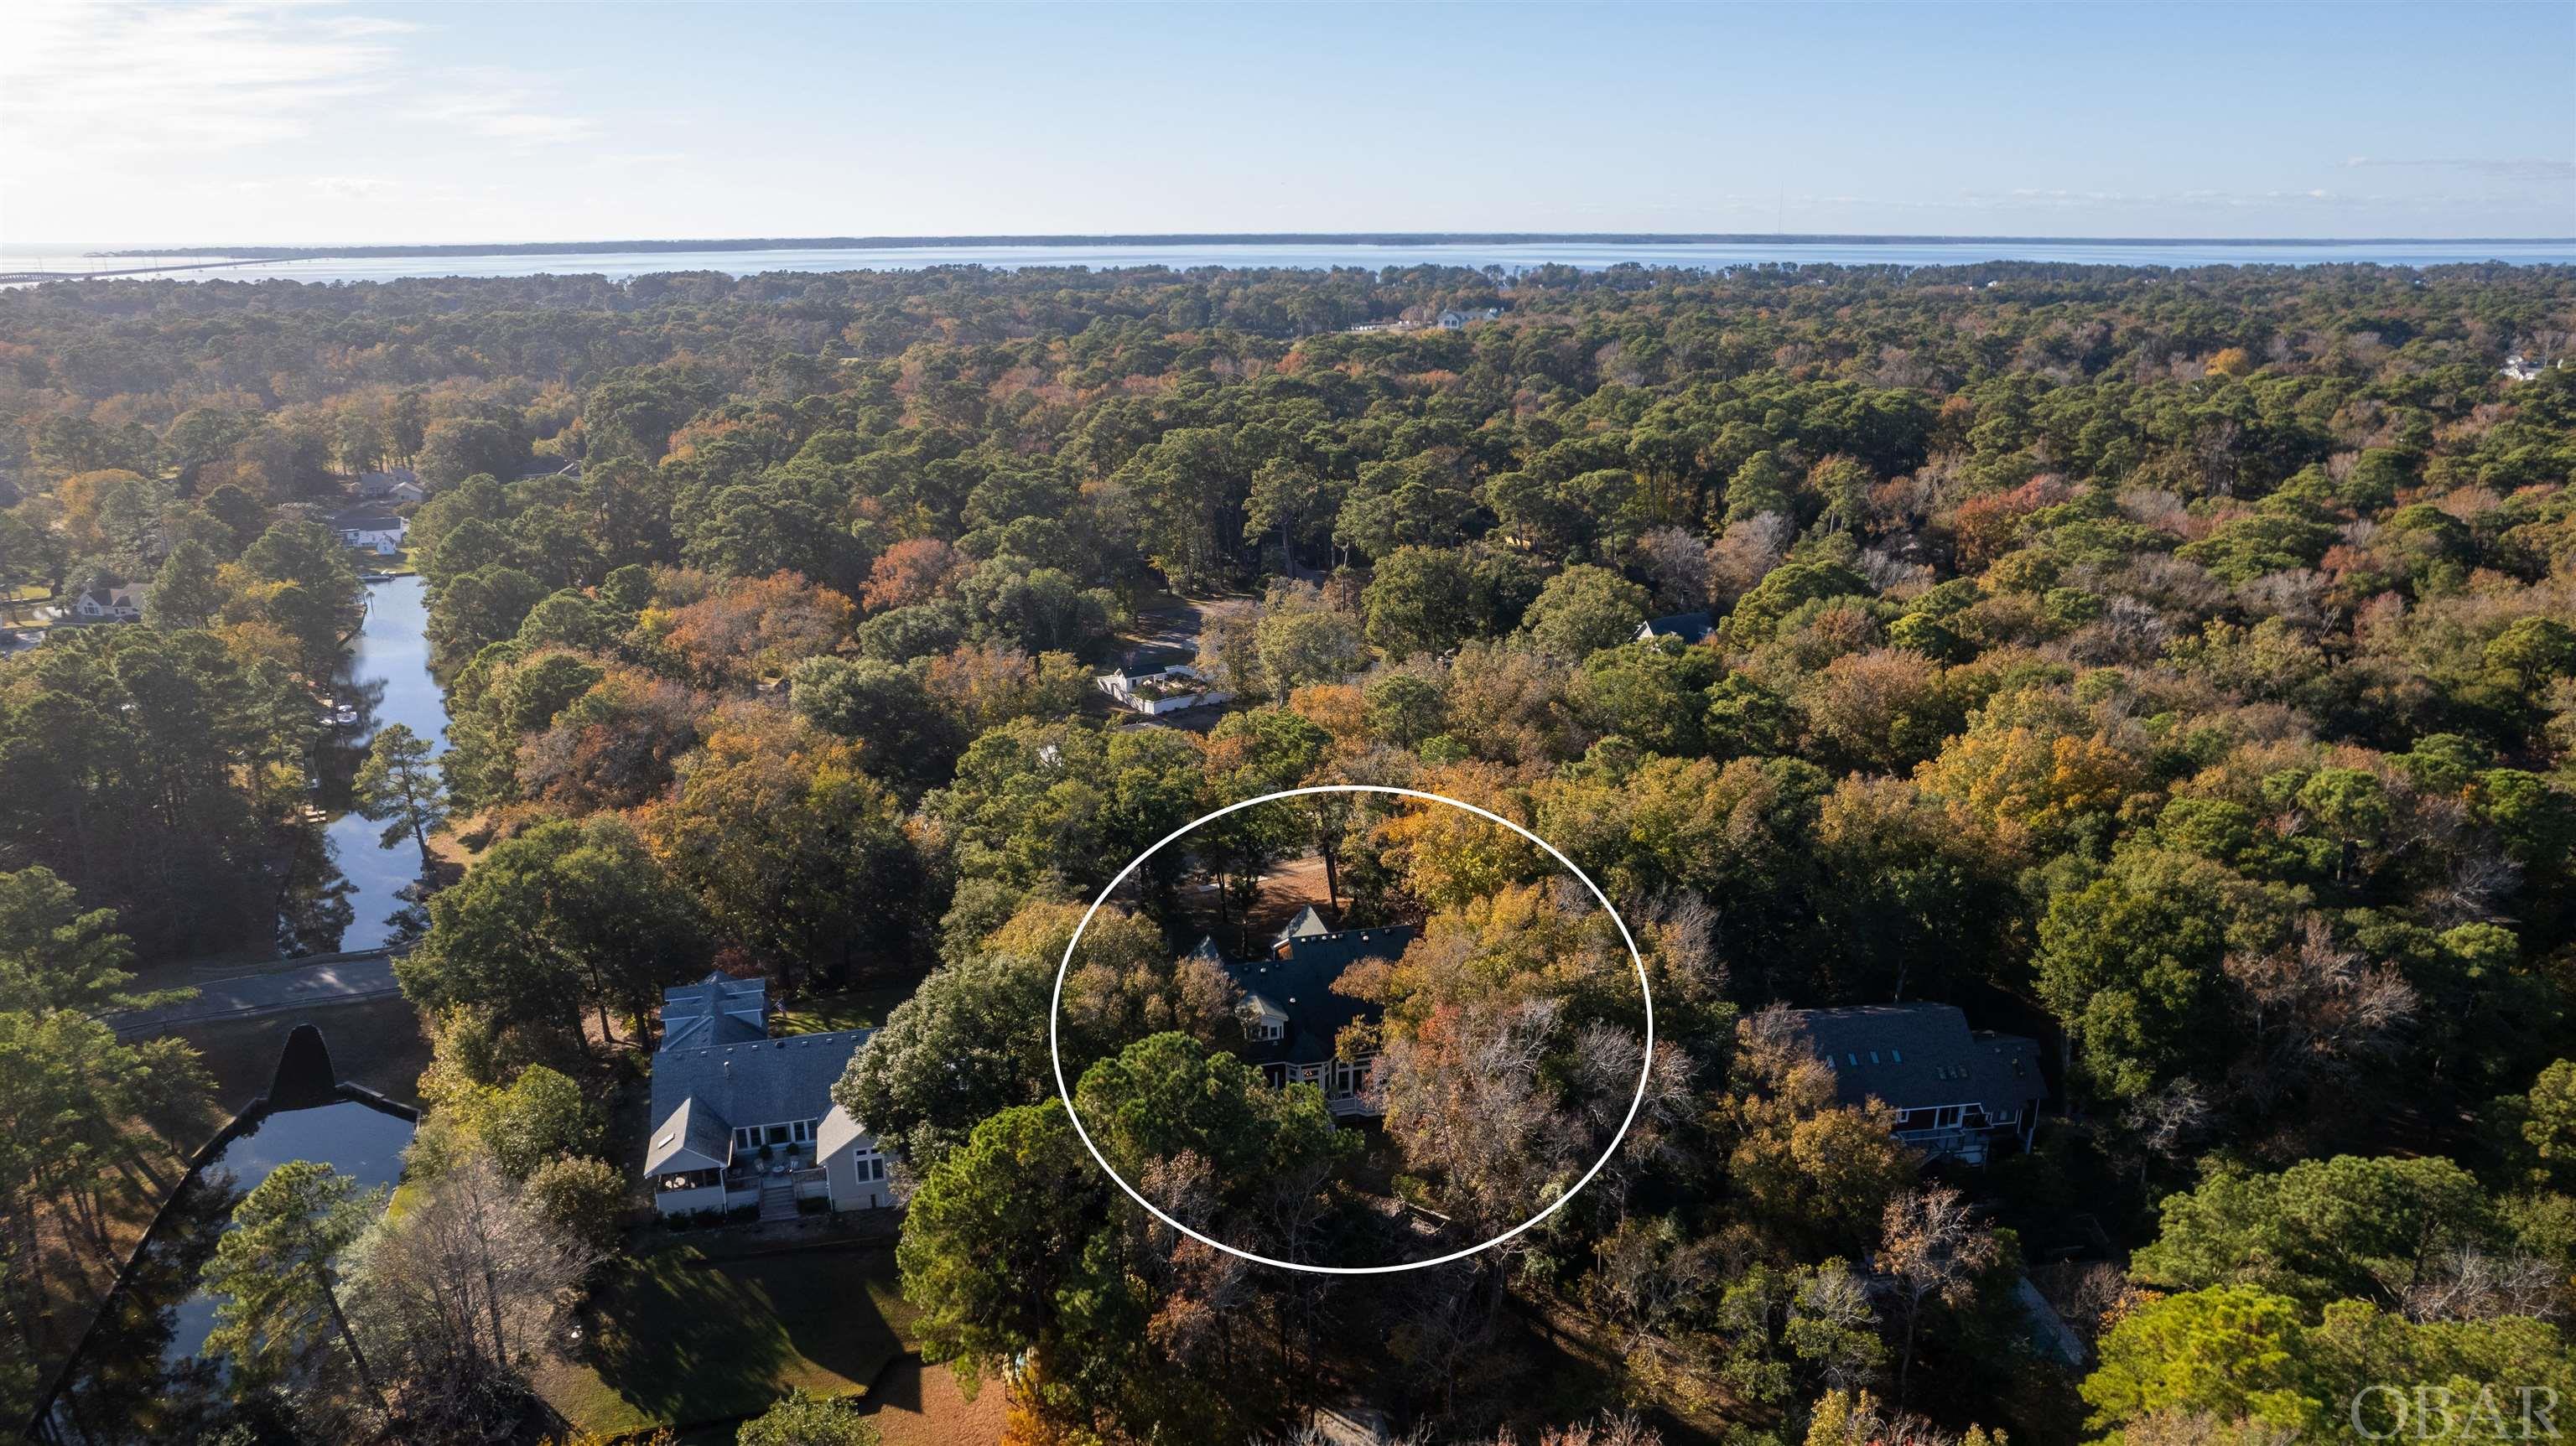 54 Trinitie Trail, Southern Shores, NC 27949, 3 Bedrooms Bedrooms, ,3 BathroomsBathrooms,Residential,For sale,Trinitie Trail,124012